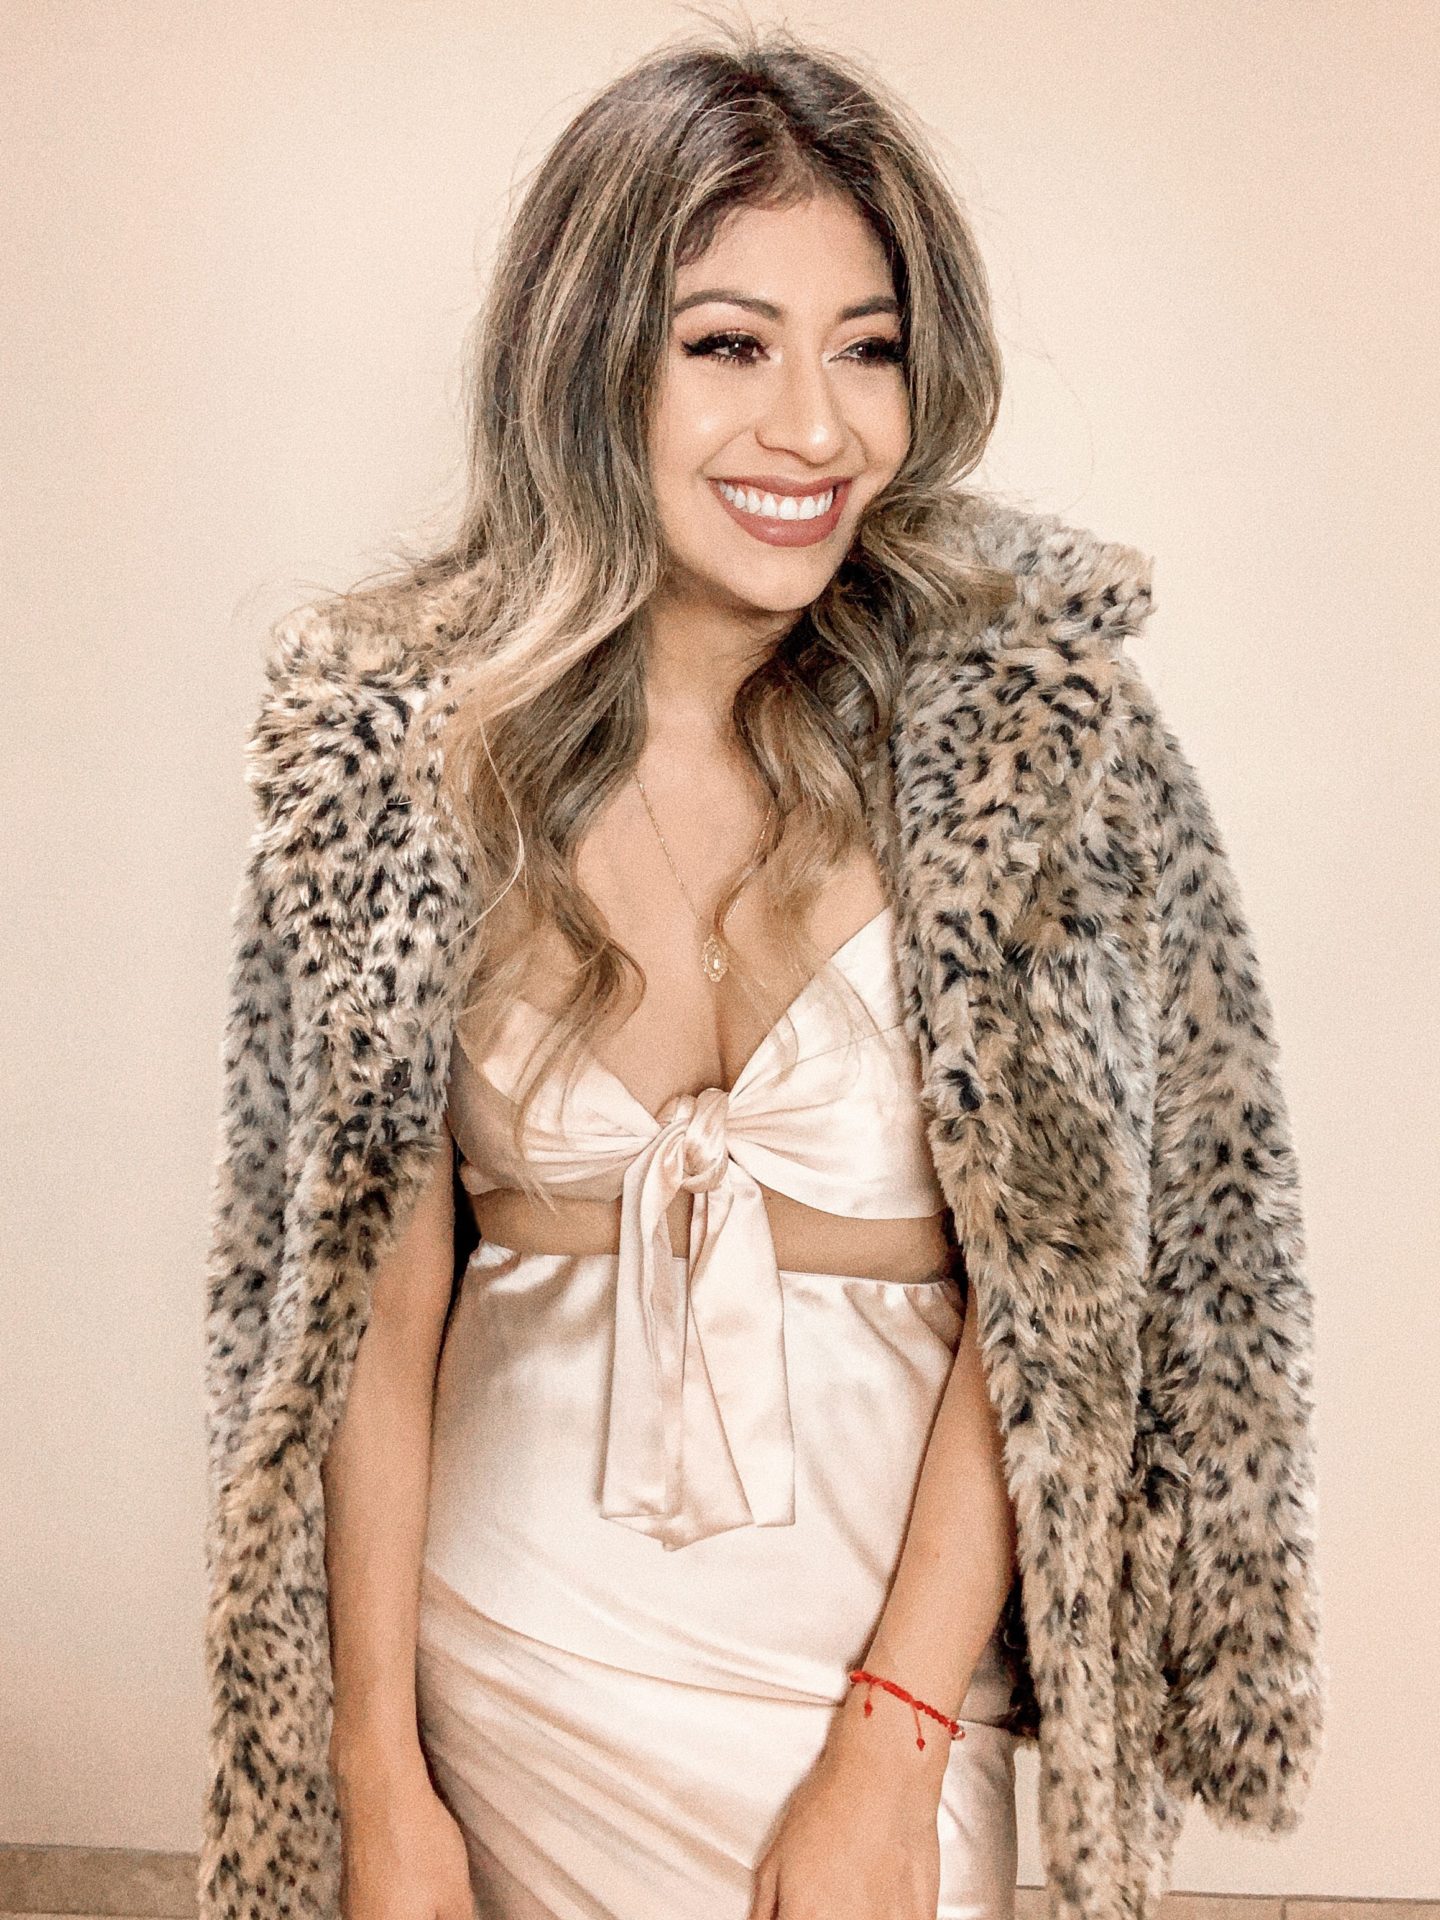 Andie Sparkles in Polly Princess Faux Fur Leopard Coat